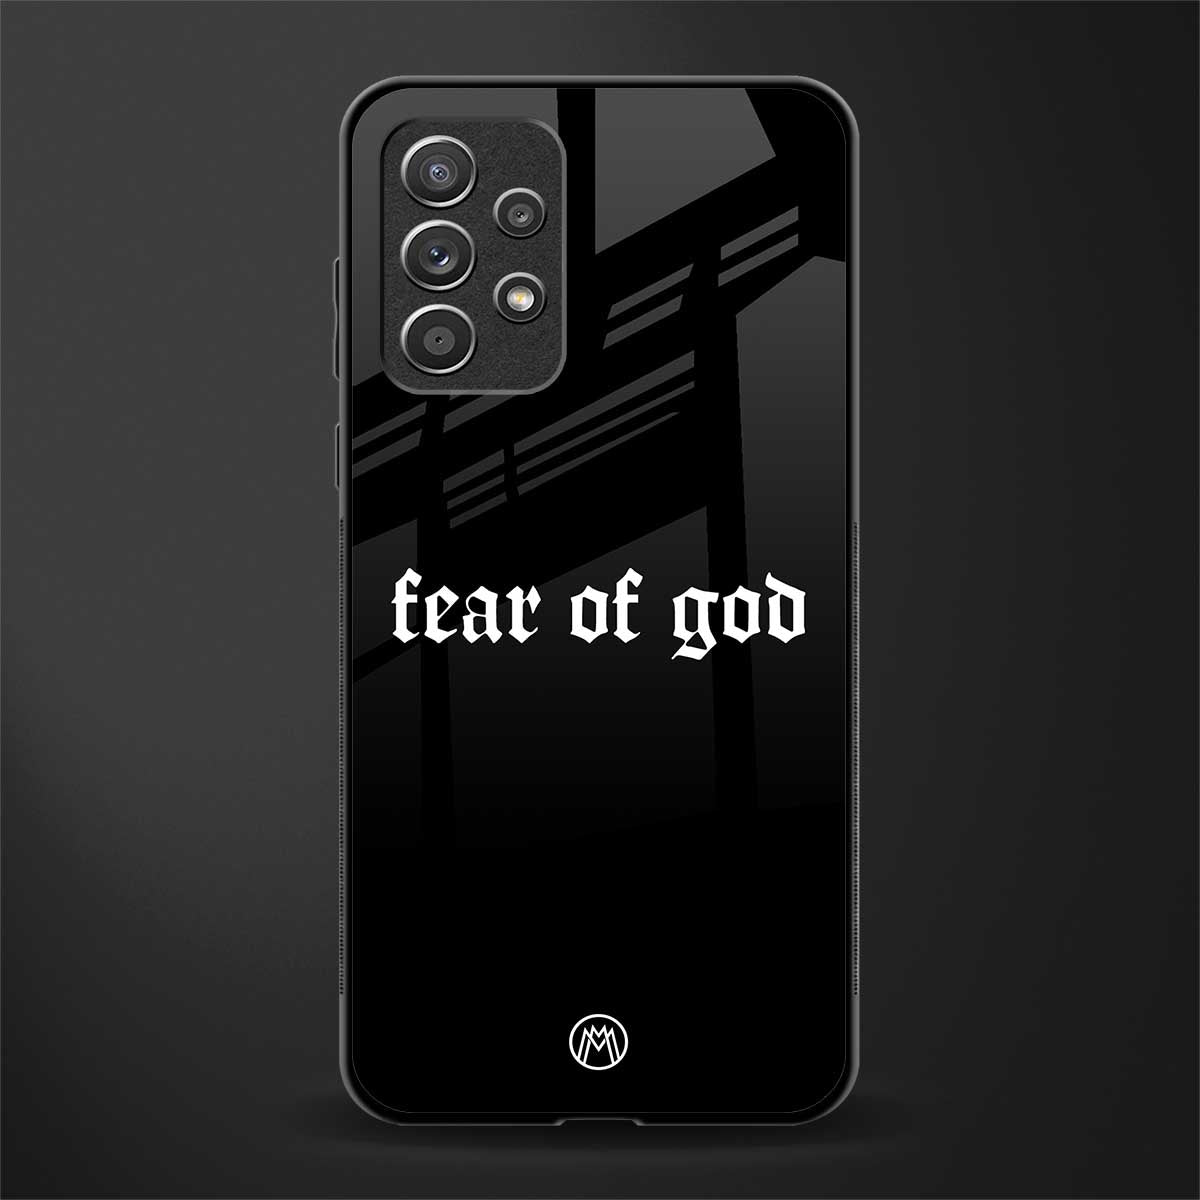 fear of god phone cover for samsung galaxy a52